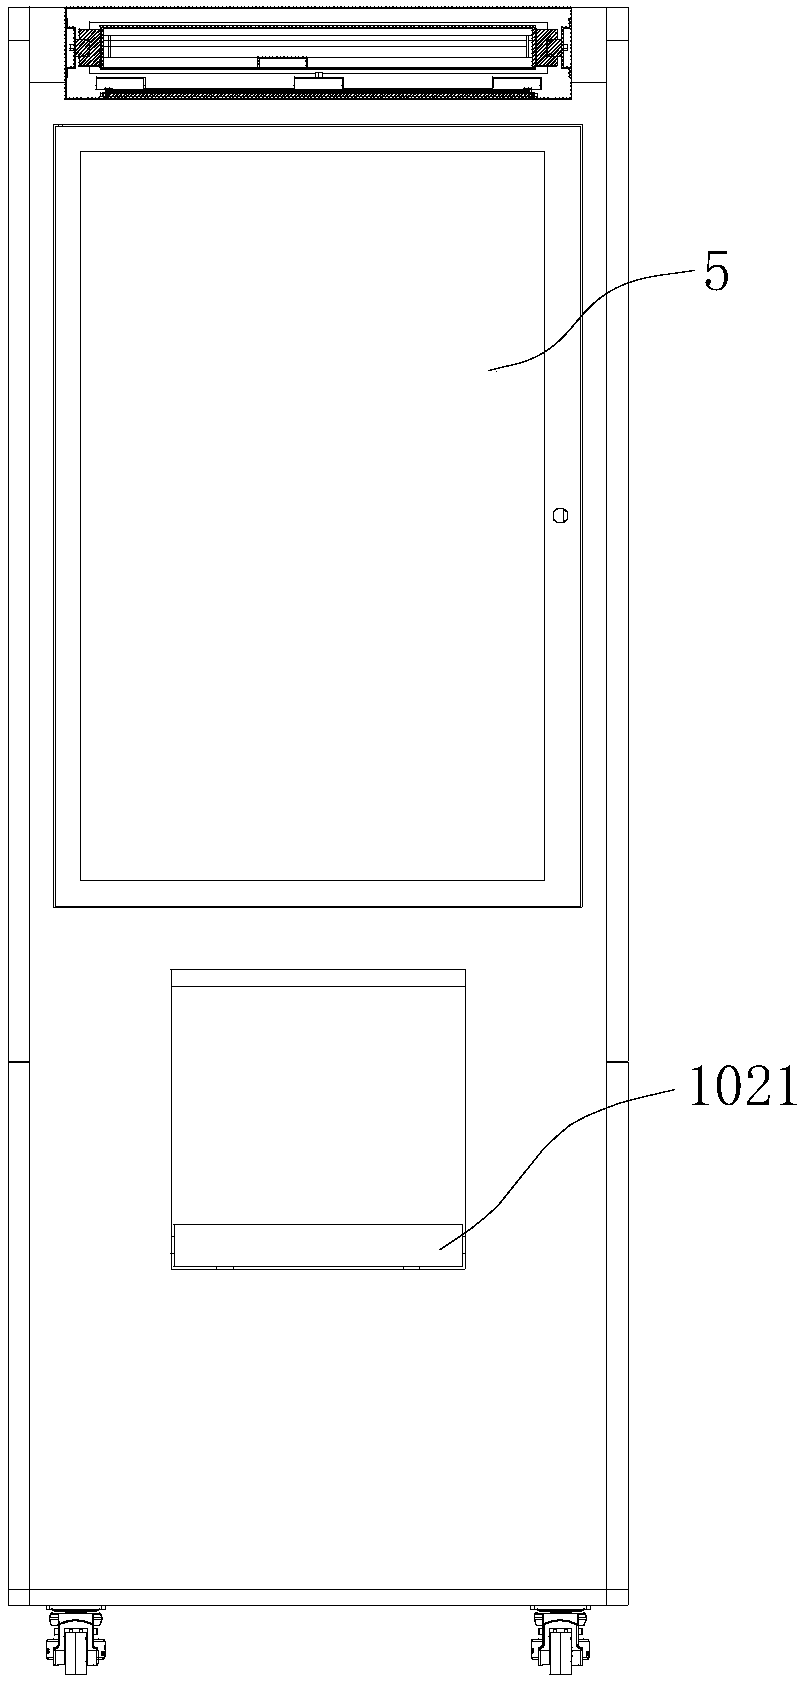 Contactless intelligent self-service license photographing equipment and method